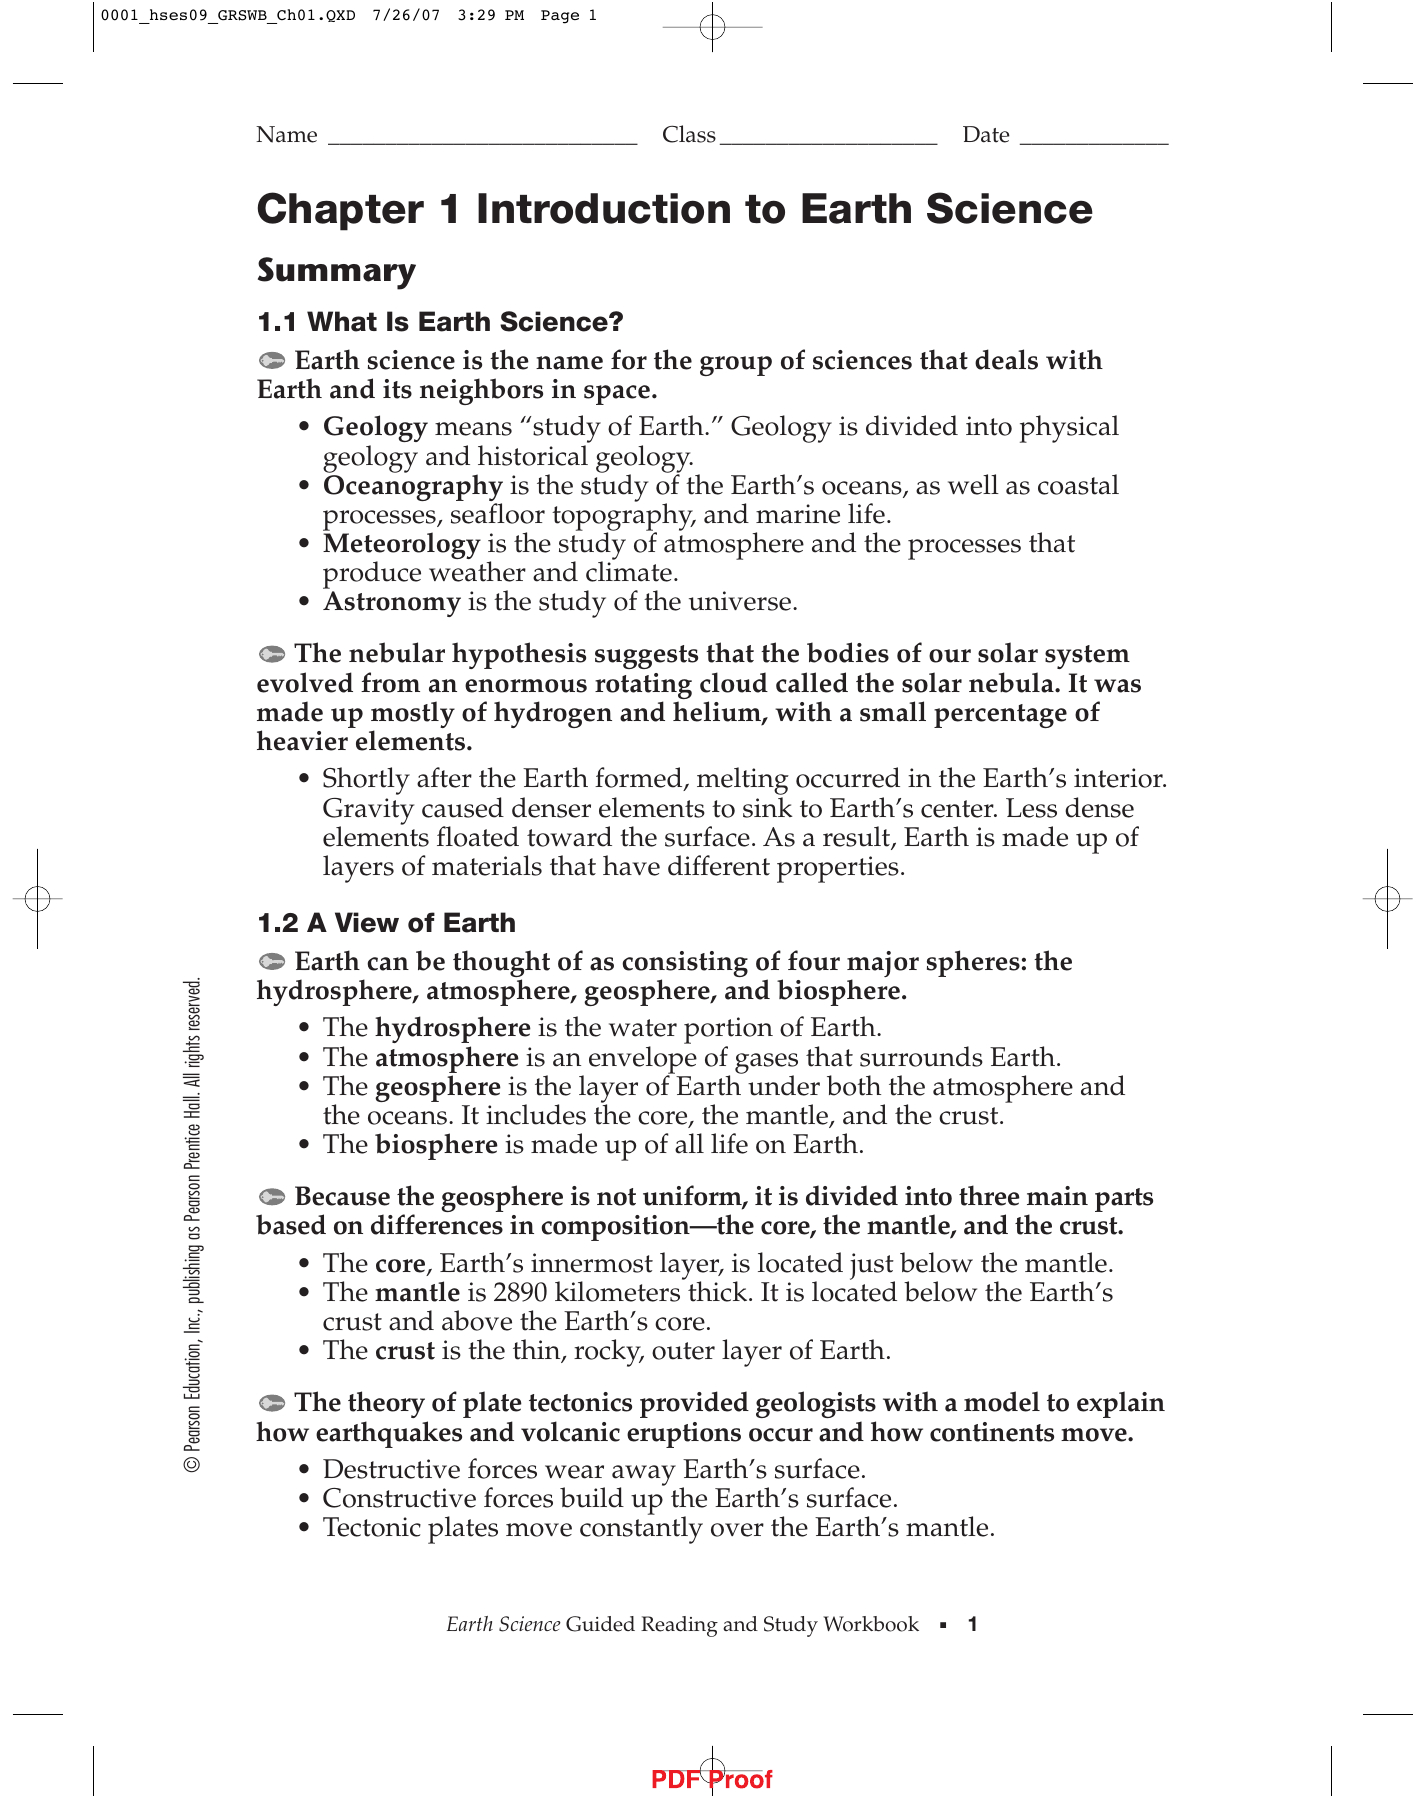 Chapter 1 Introduction To Earth Science